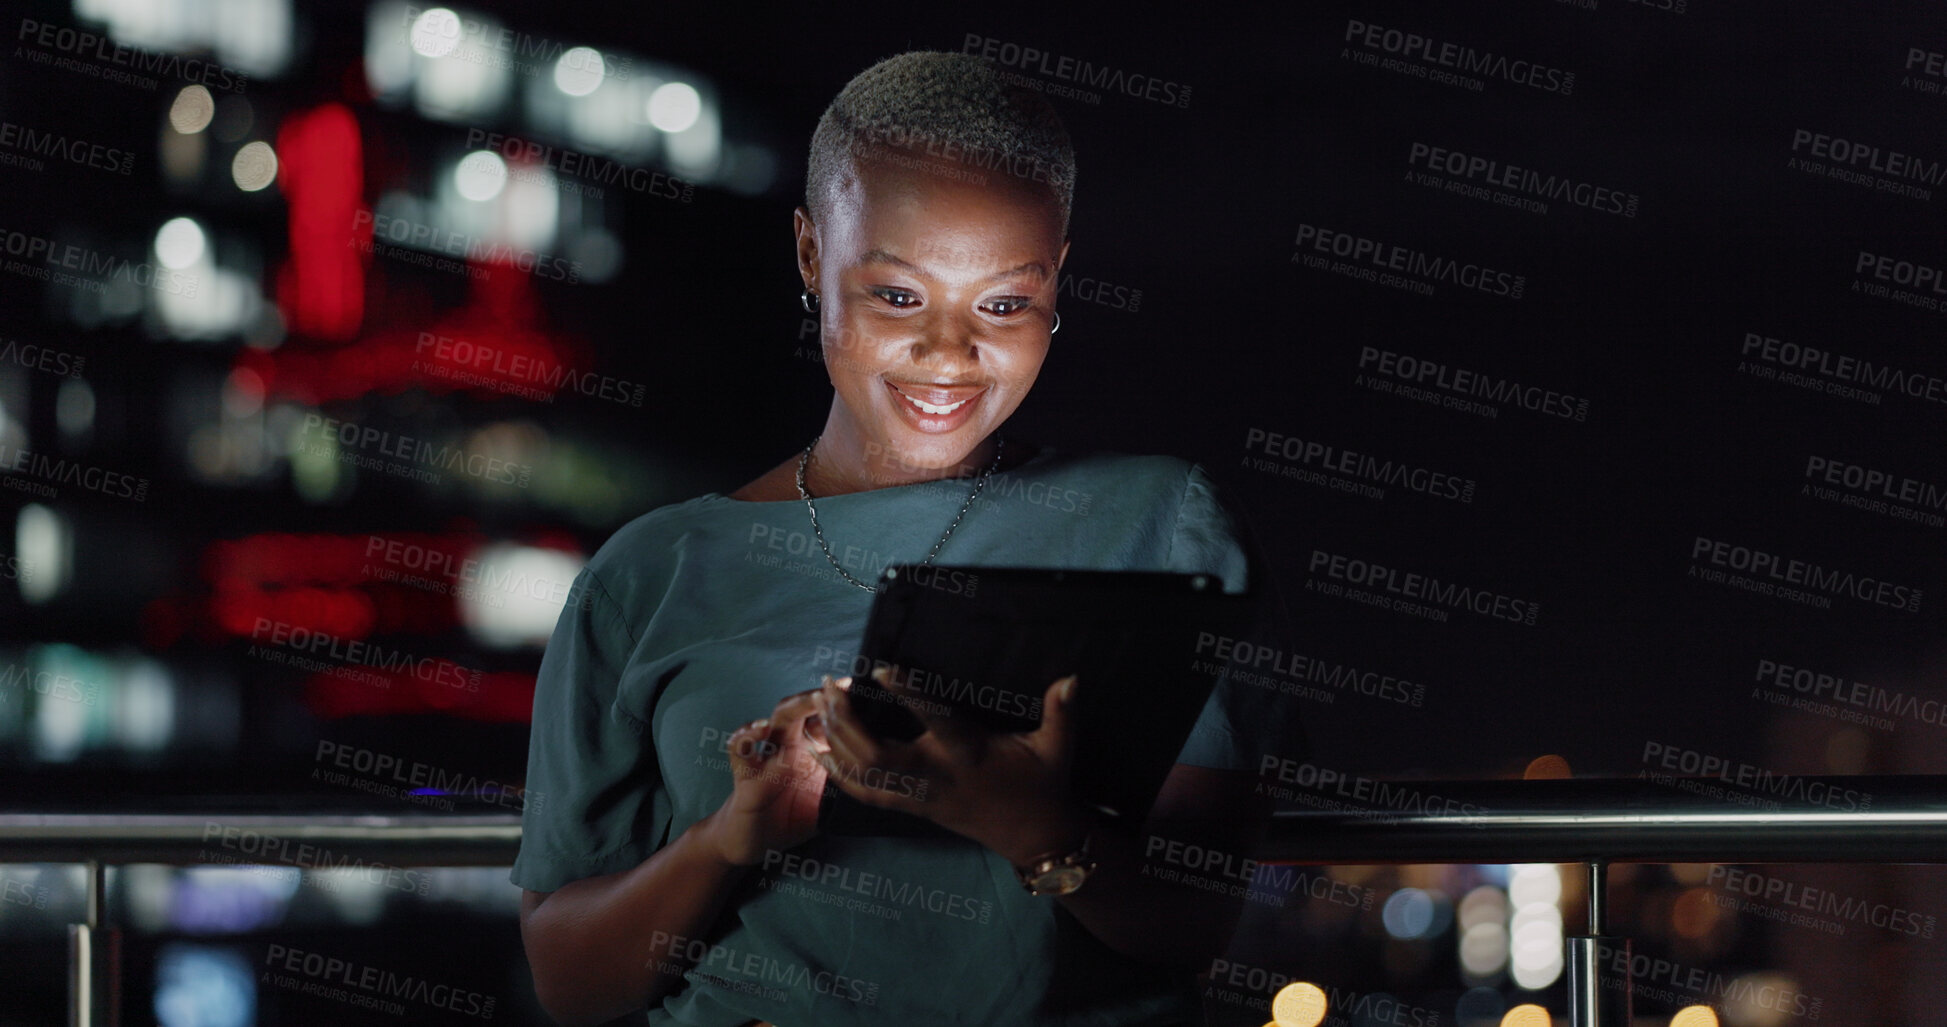 Buy stock photo Tablet, night balcony or laughing woman reading funny social network feedback, customer experience or ecommerce. Brand monitoring data, website info or African media worker doing online survey review